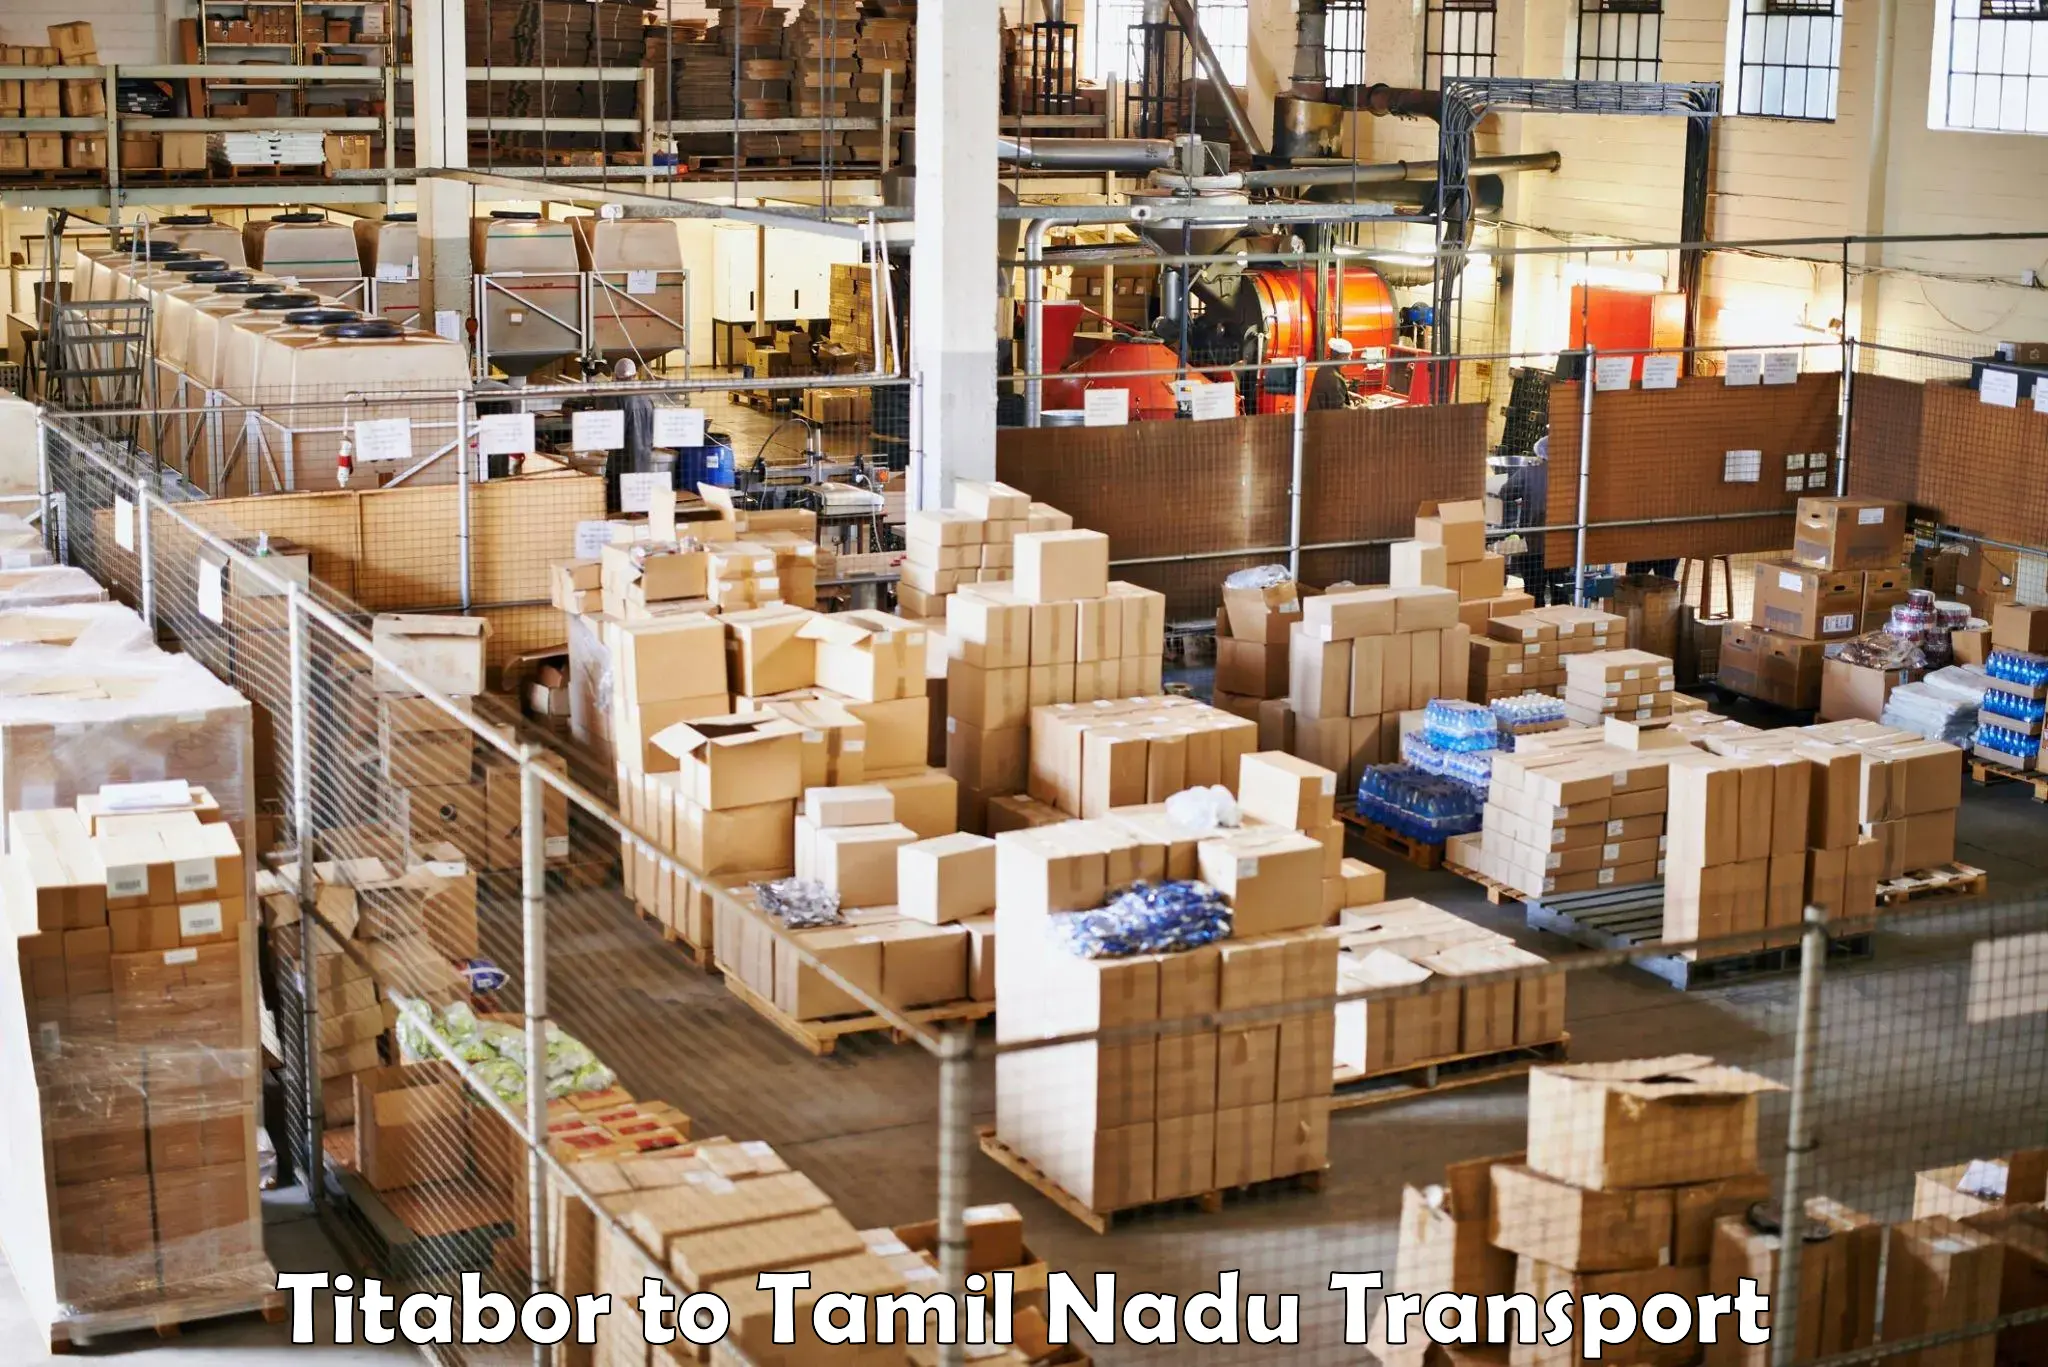 Domestic transport services Titabor to Kulittalai